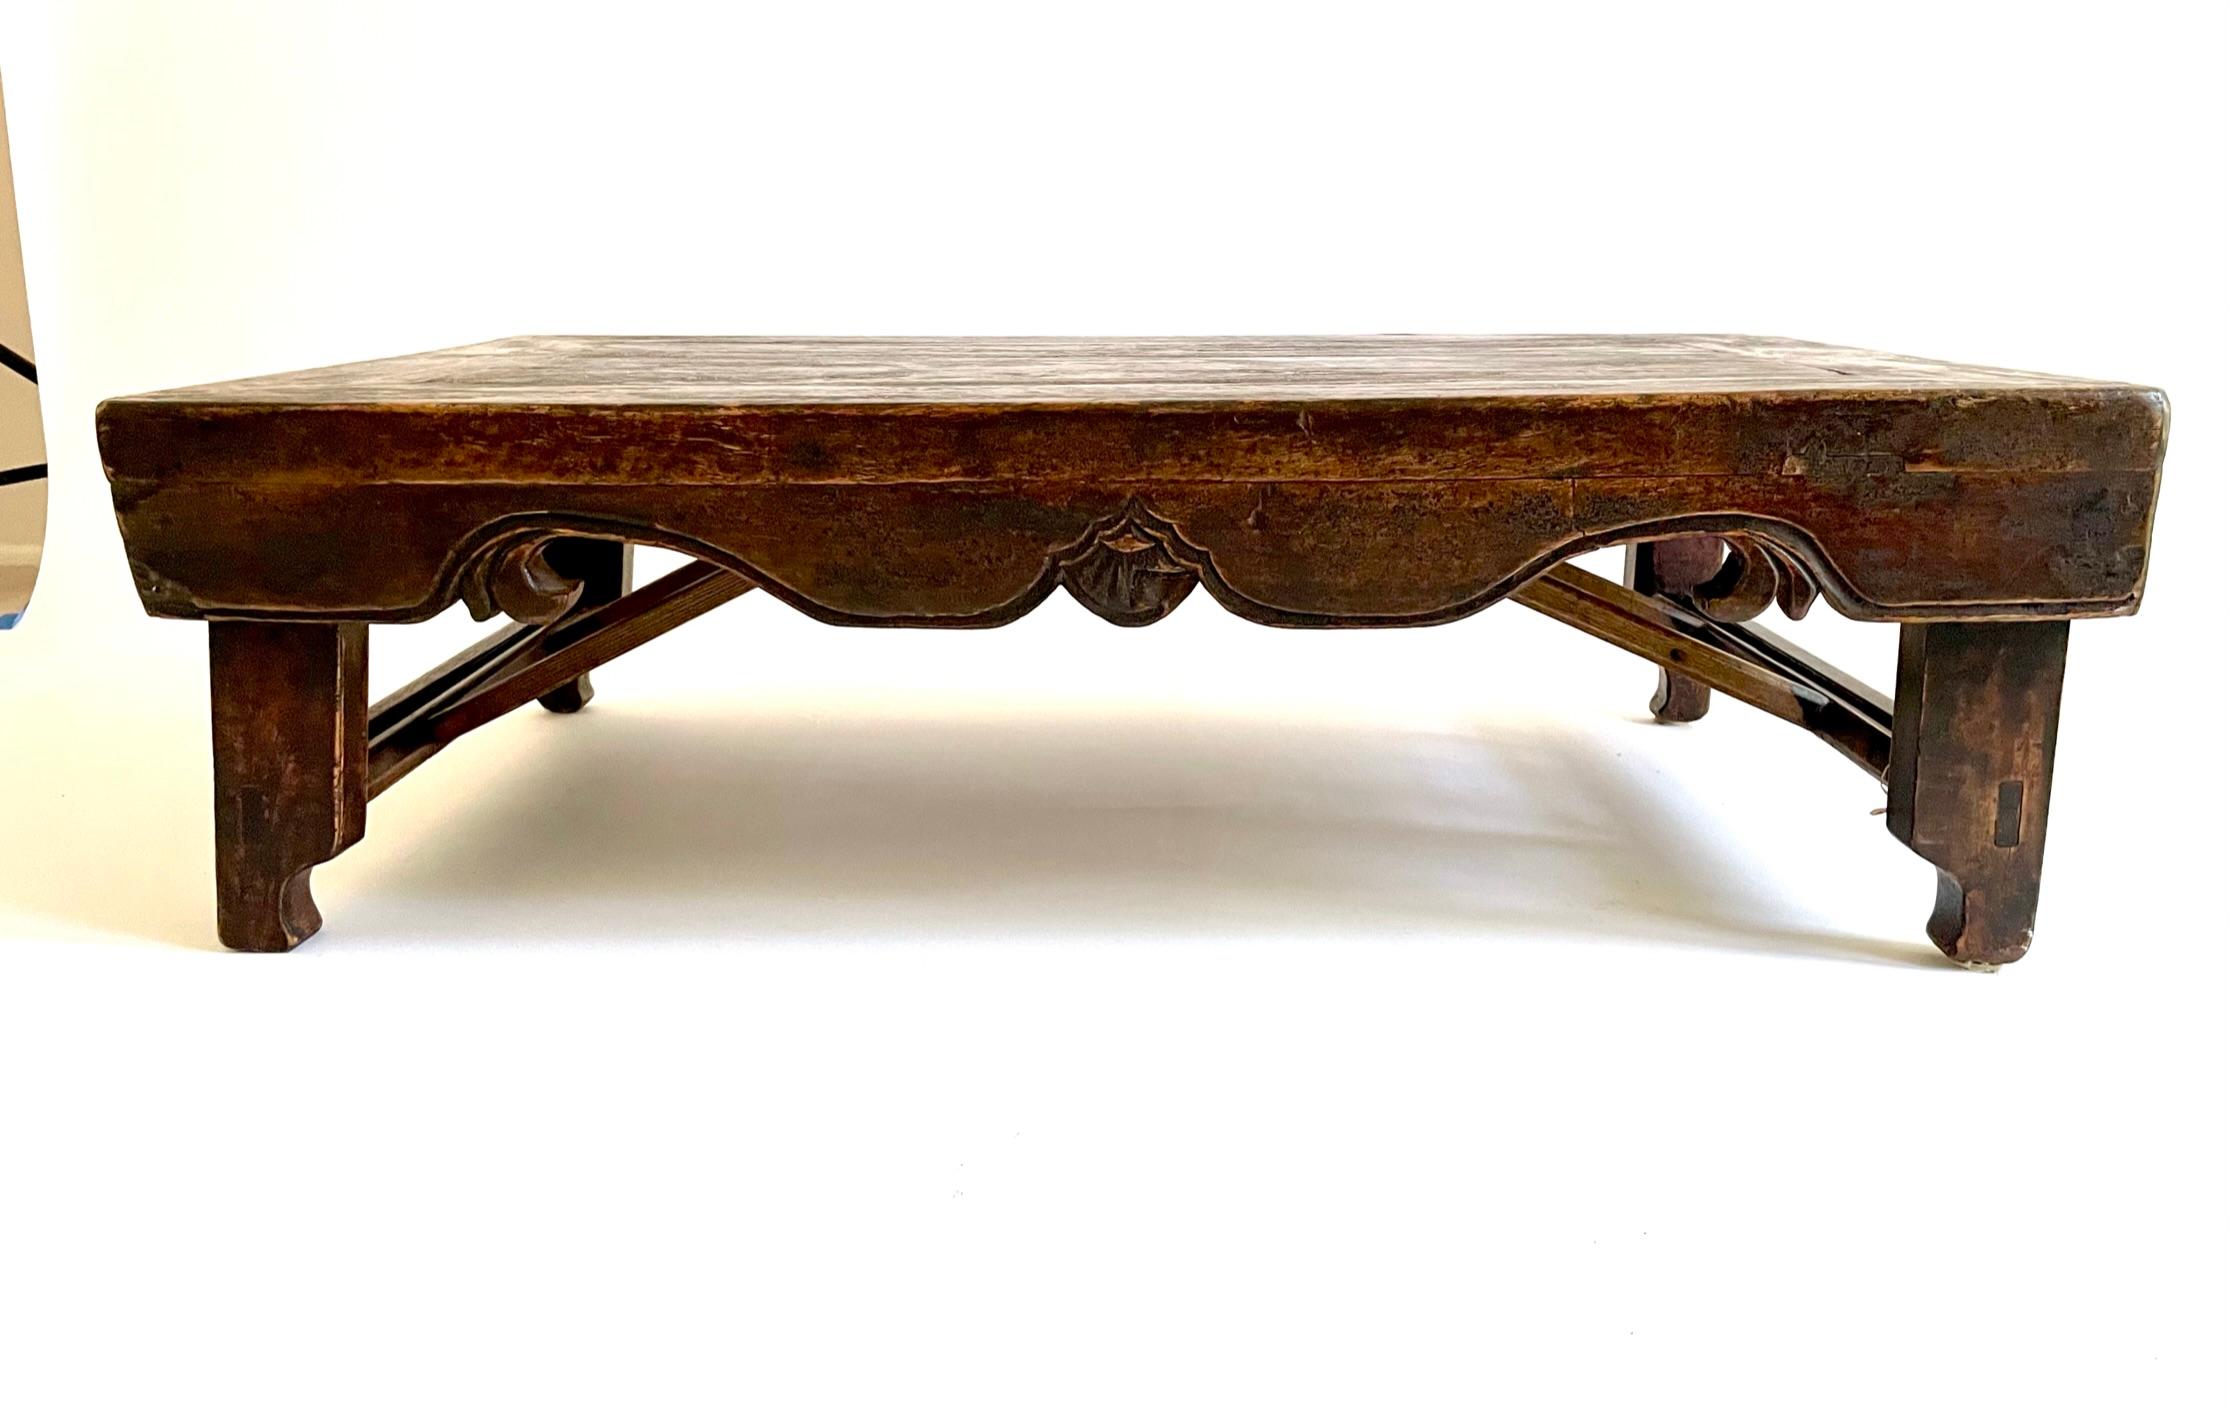 The unusual 19th century Kang Table (low table) is designed for the legs to fold into the table for storage when it’s not in use. It’s carved from Northern Elmwood (Yumu) and lacquered in a dark brown color and crafted with traditional Chinese